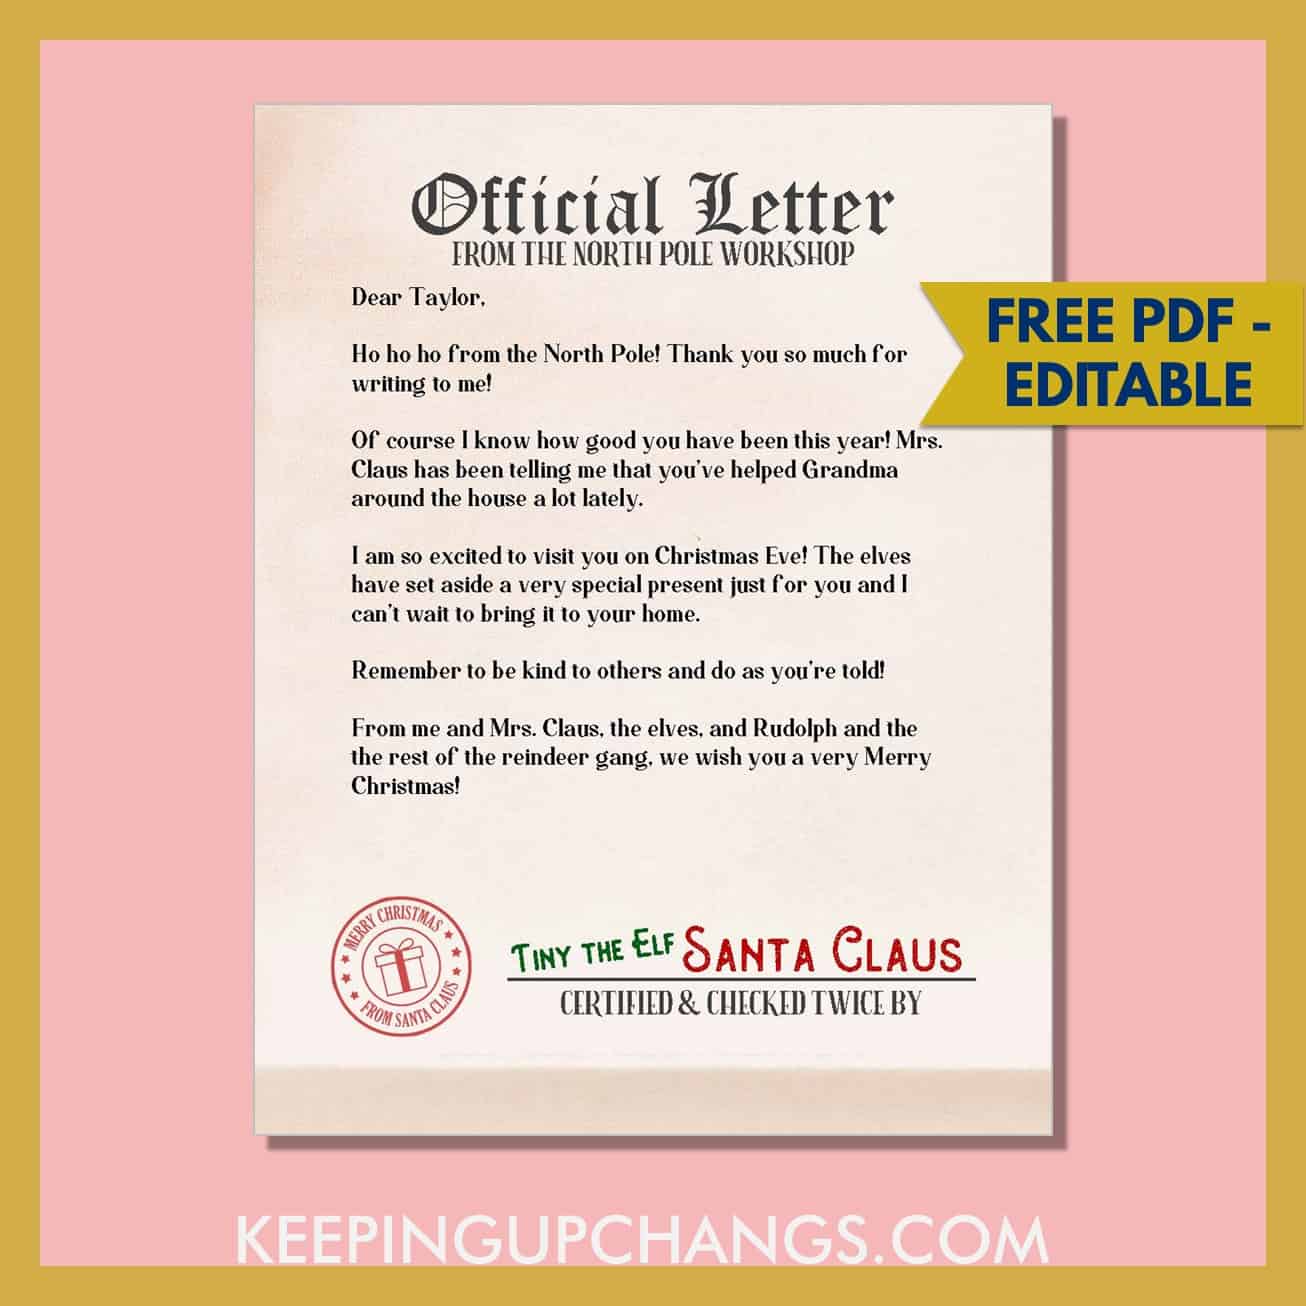 free official north pole response editable letter from santa template.